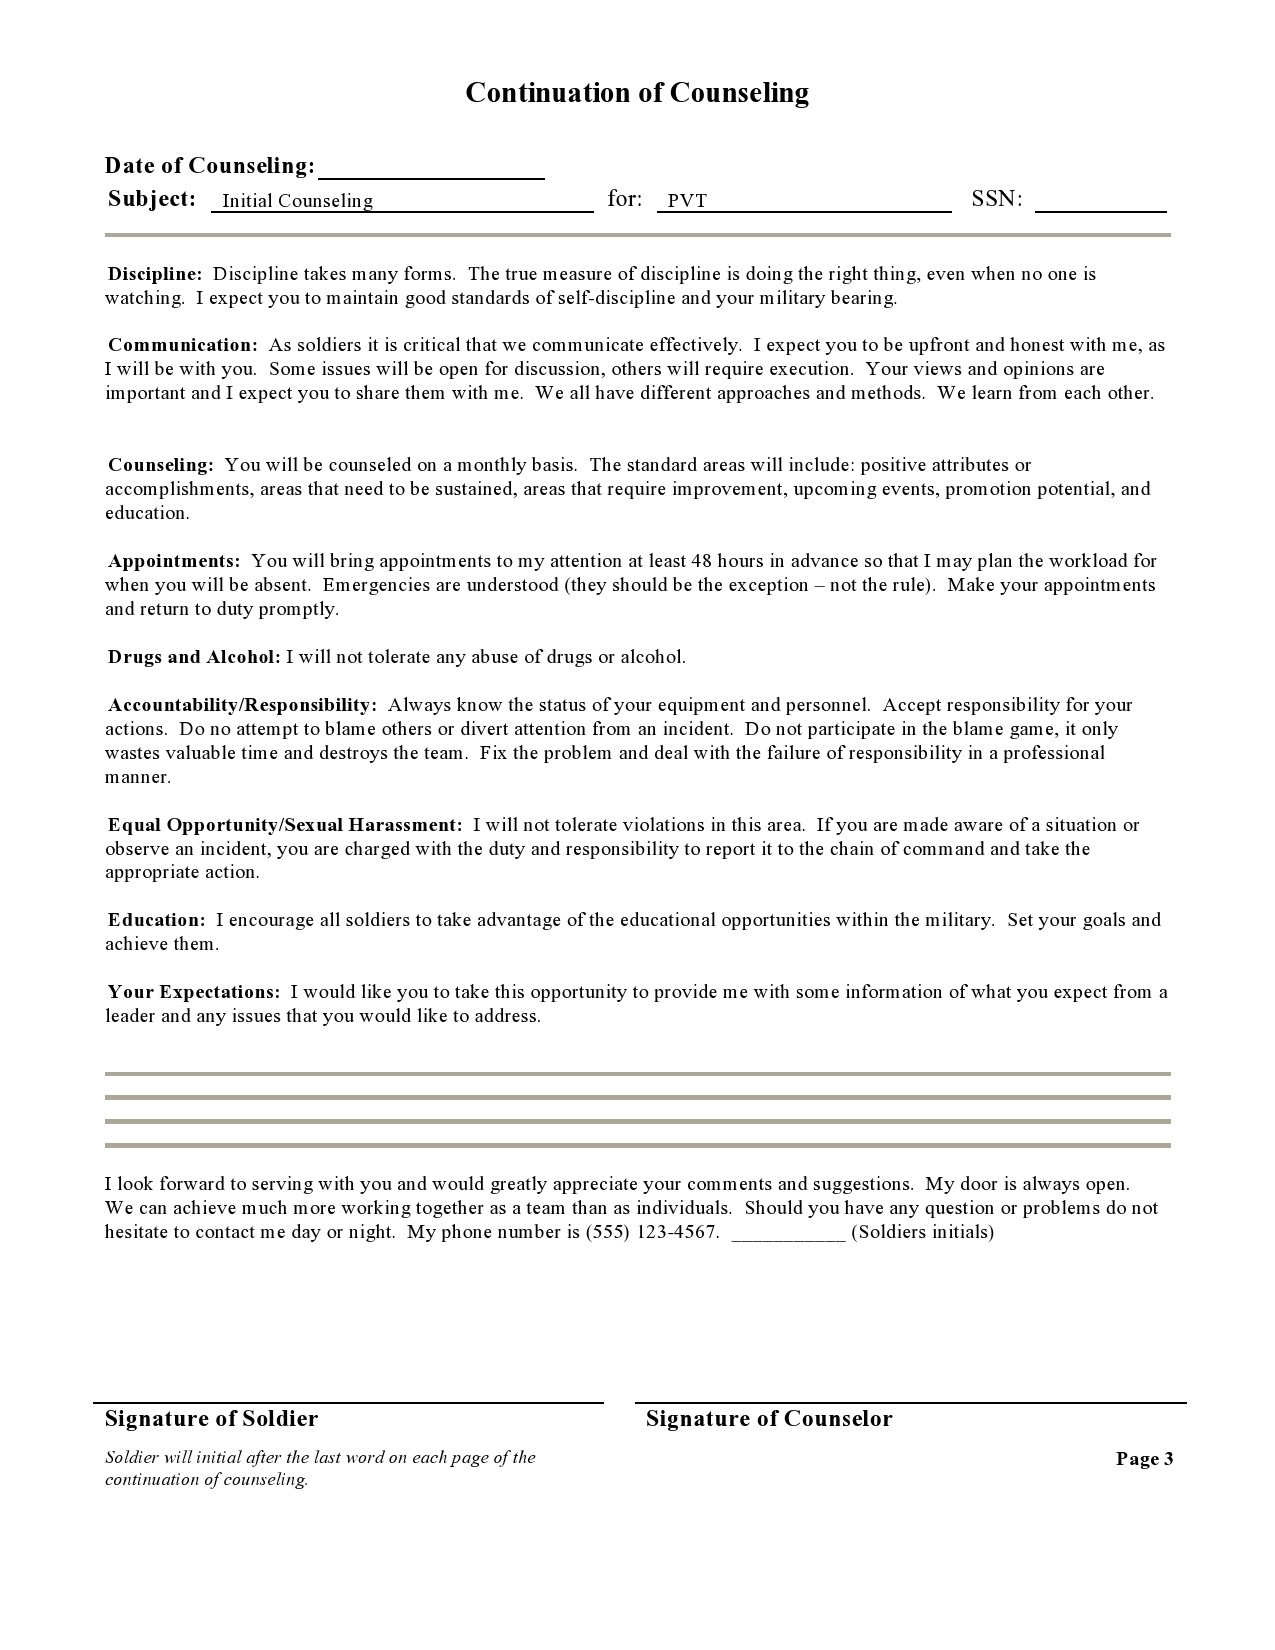 Free army counseling form 03